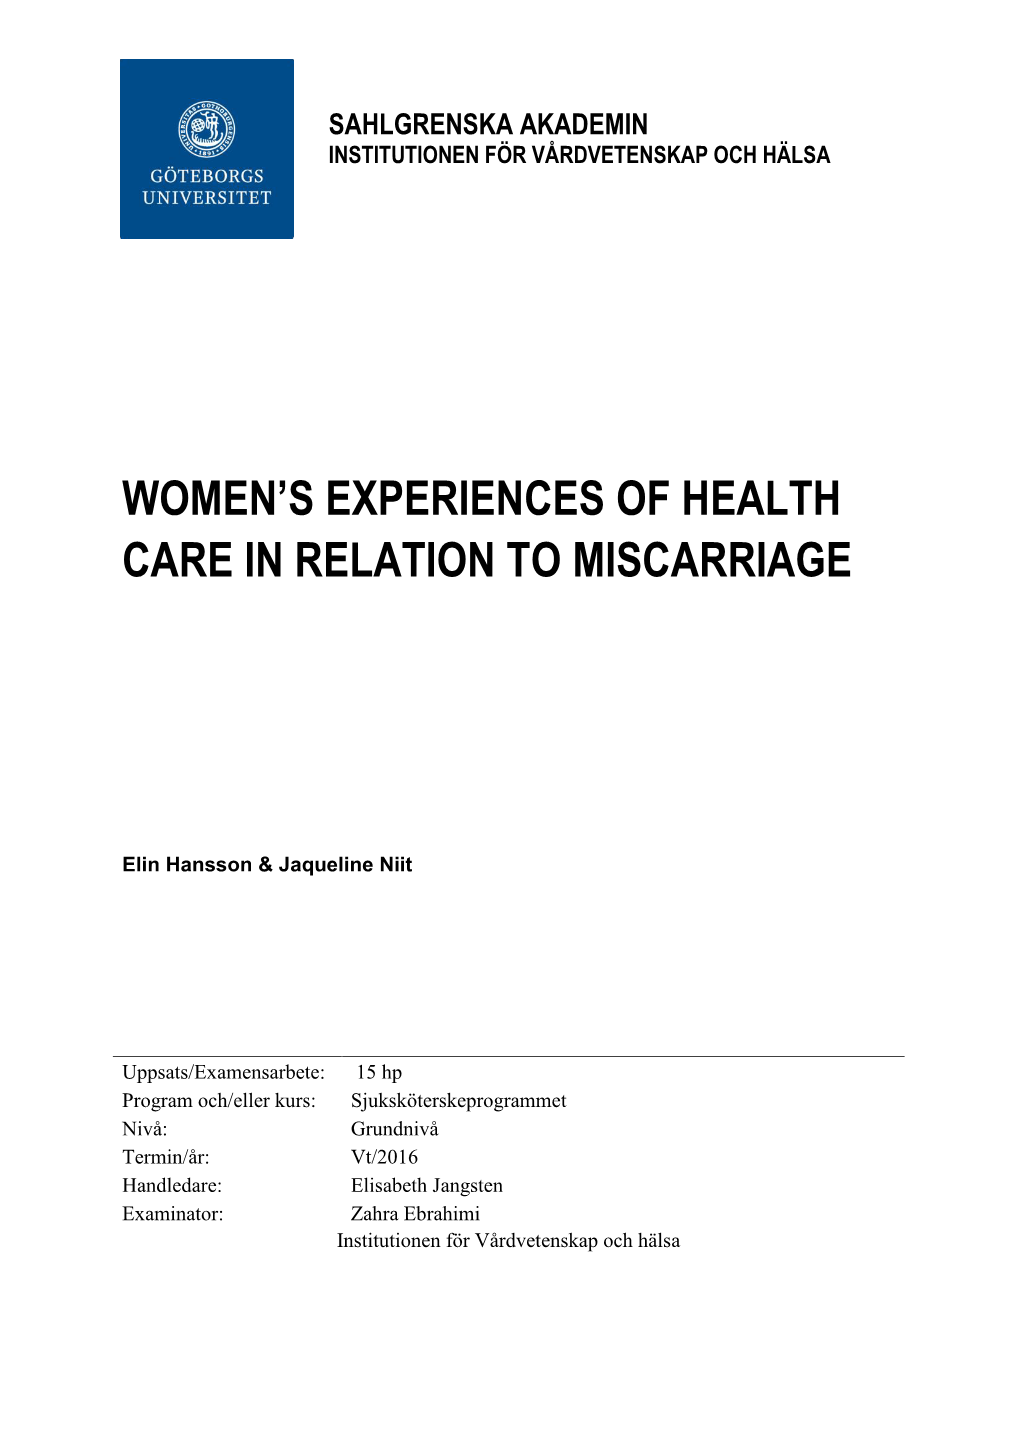 Women's Experiences of Health Care in Relation to Miscarriage